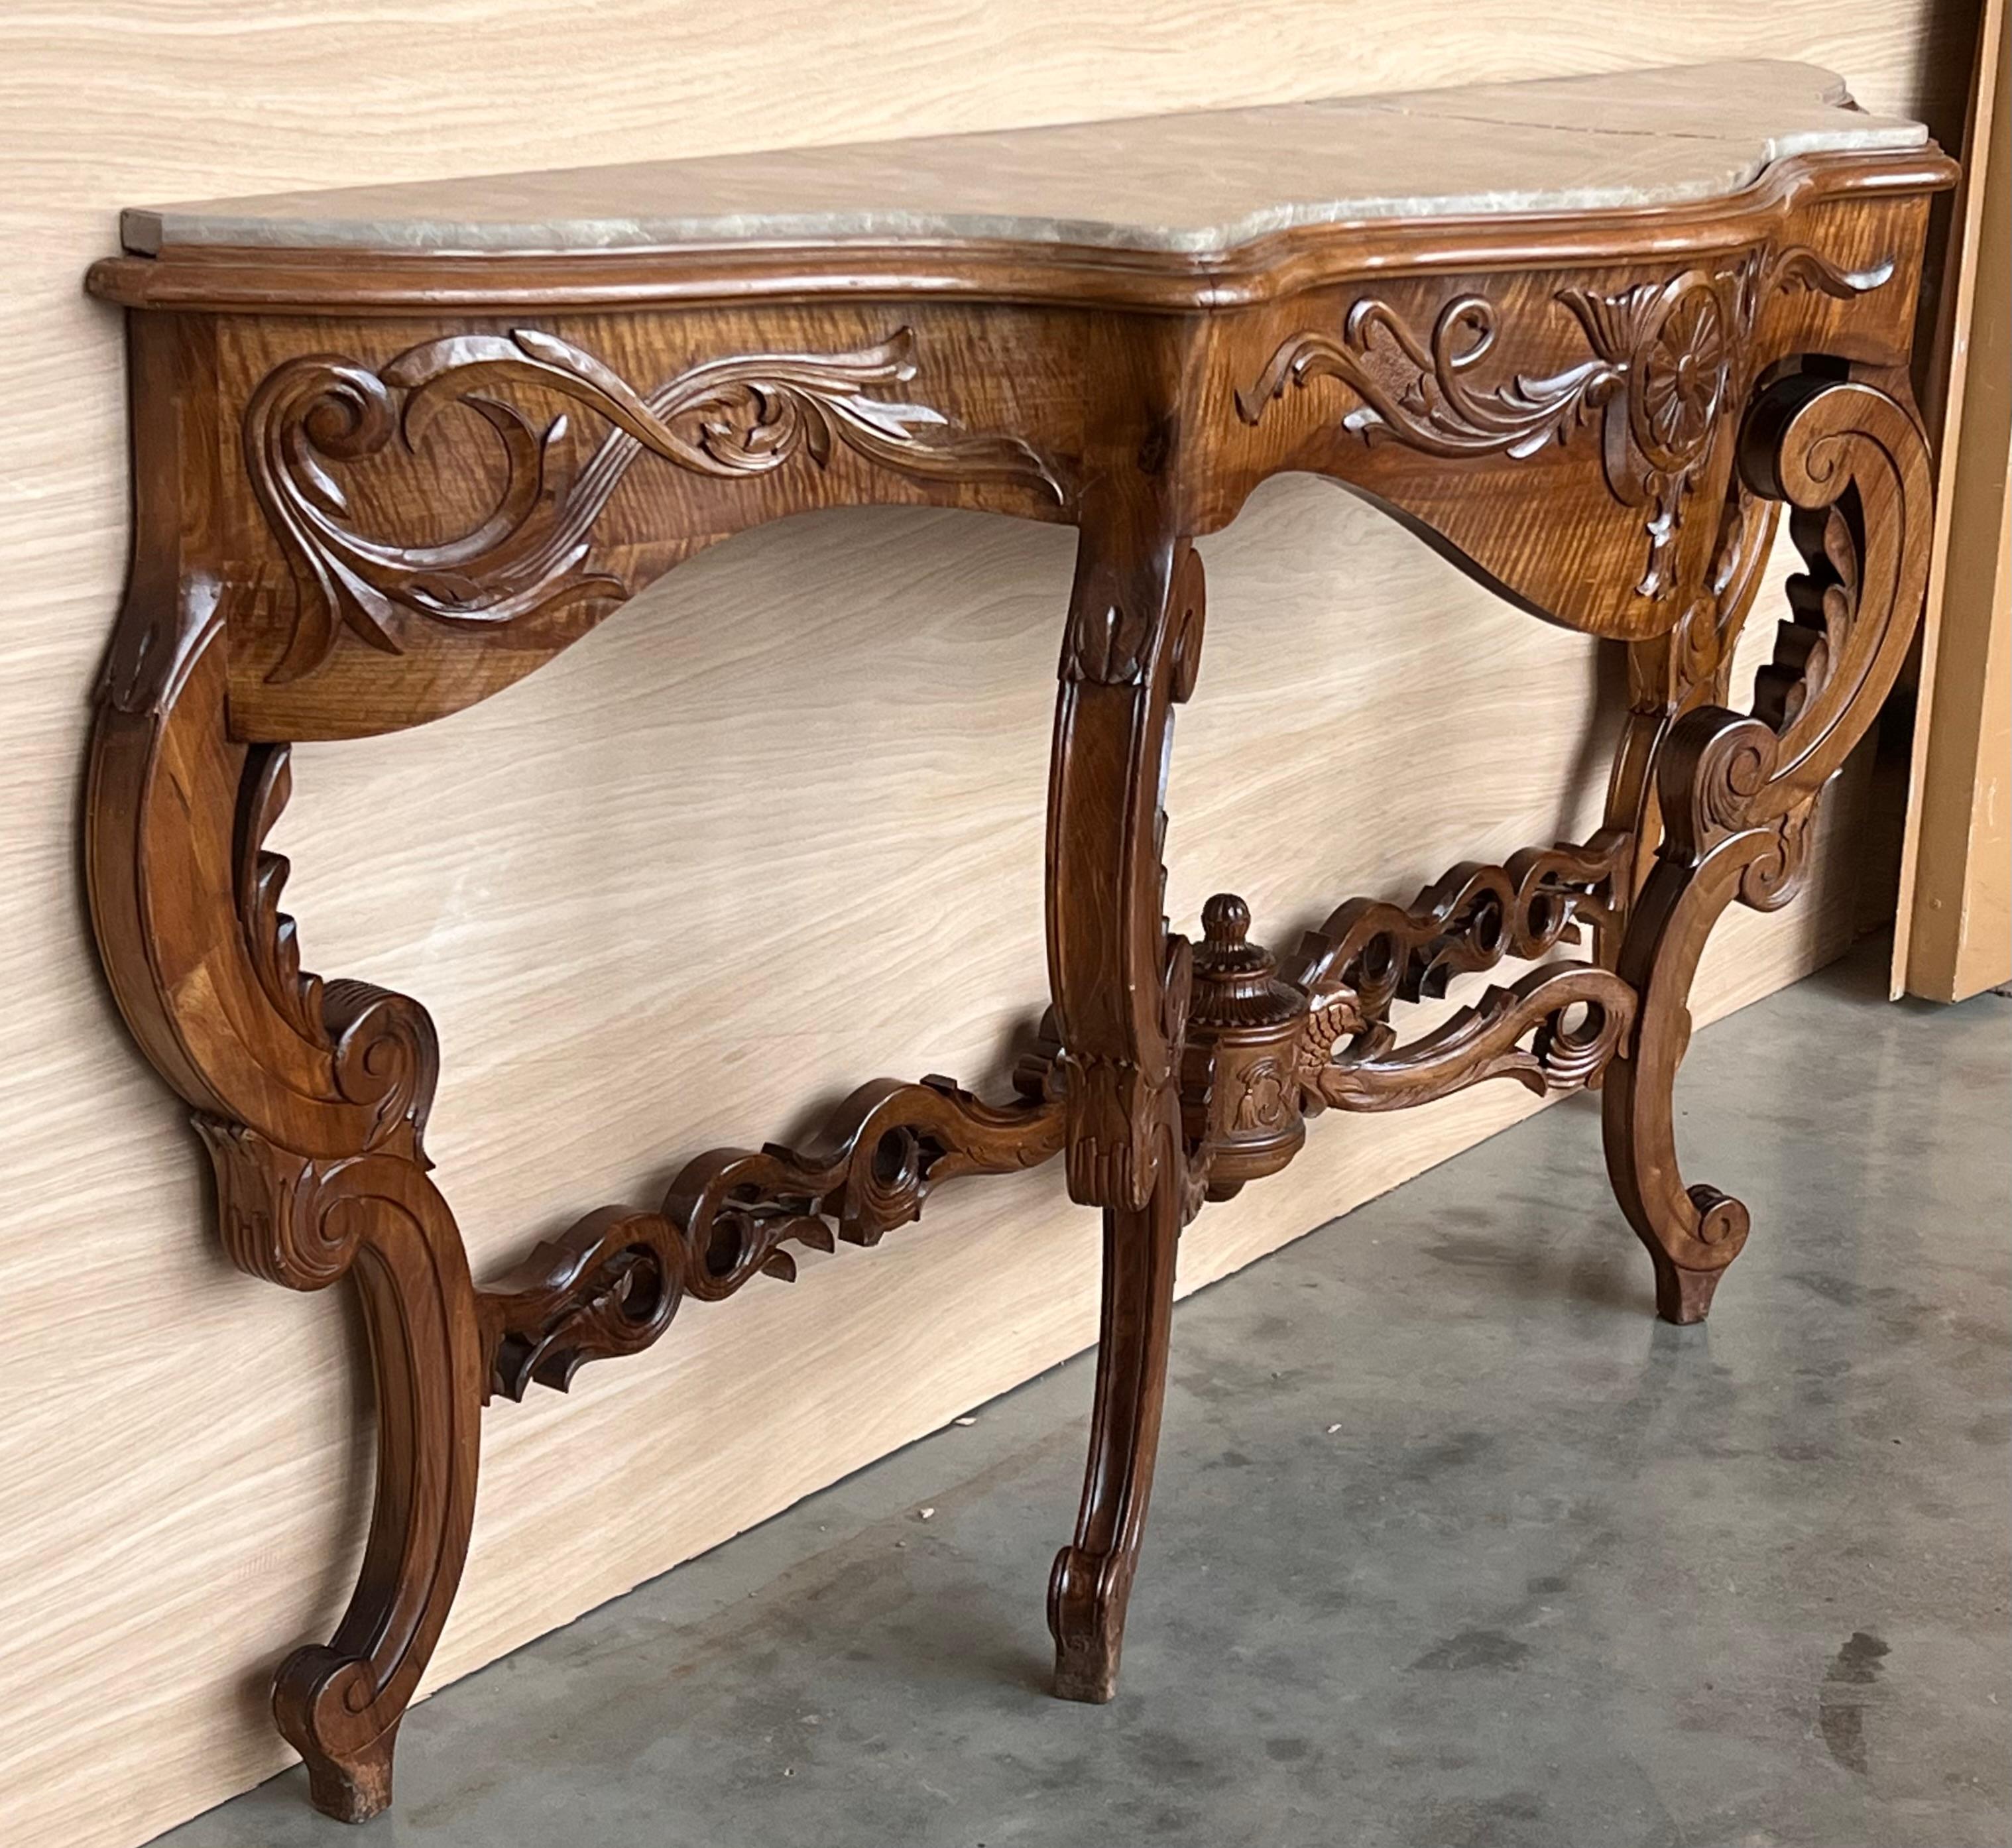 20th French Regency carved walnut console table with gilted edges 

20th century French Regence style beautifully carved with leaves walnut console. Wood top with carved front, over hand-carved frieze supported by four cabriole legs. Very massive